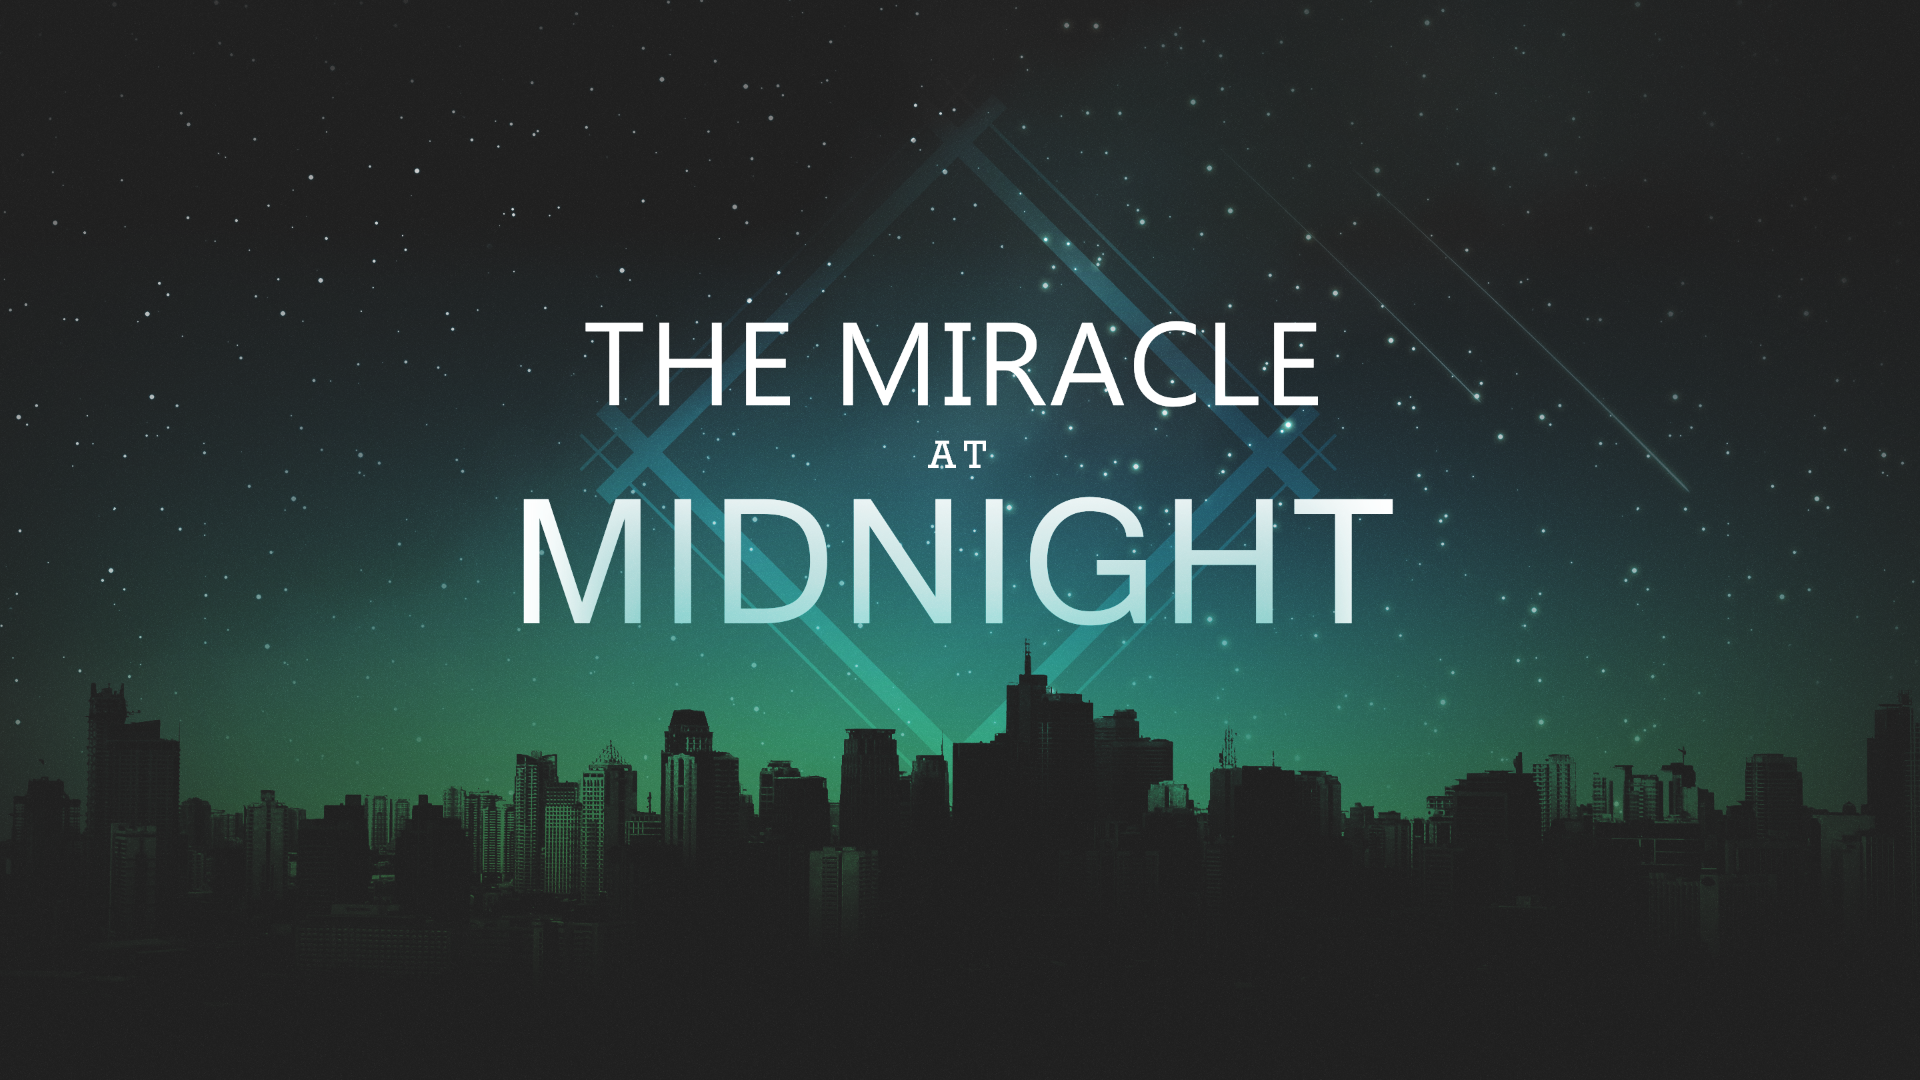 The Miracle at Midnight